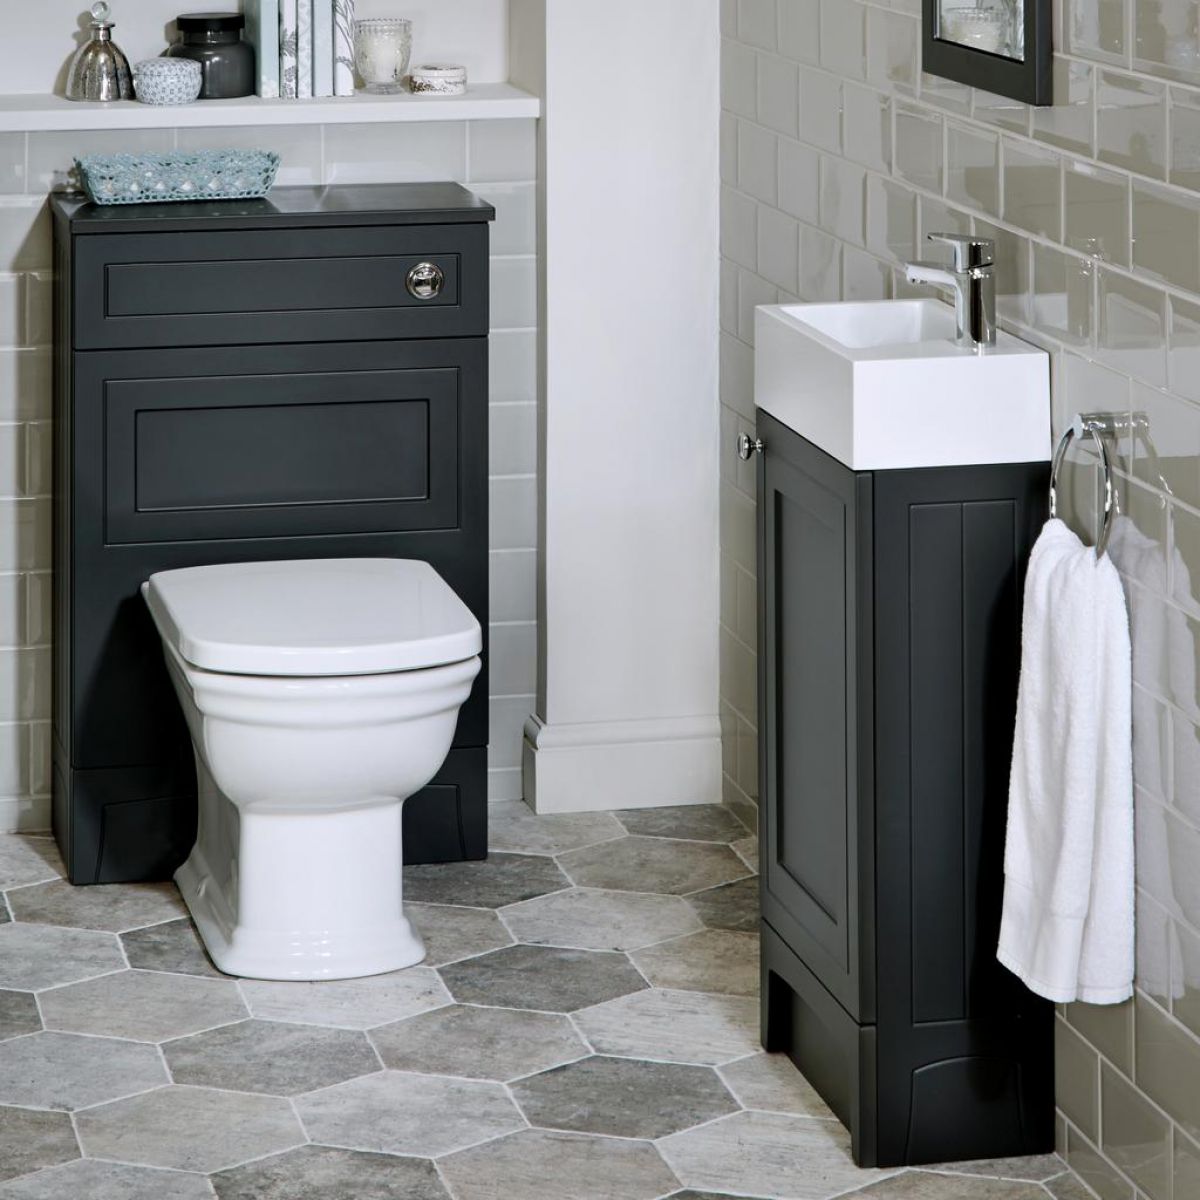 image example of modern contemporary bathroom furniture